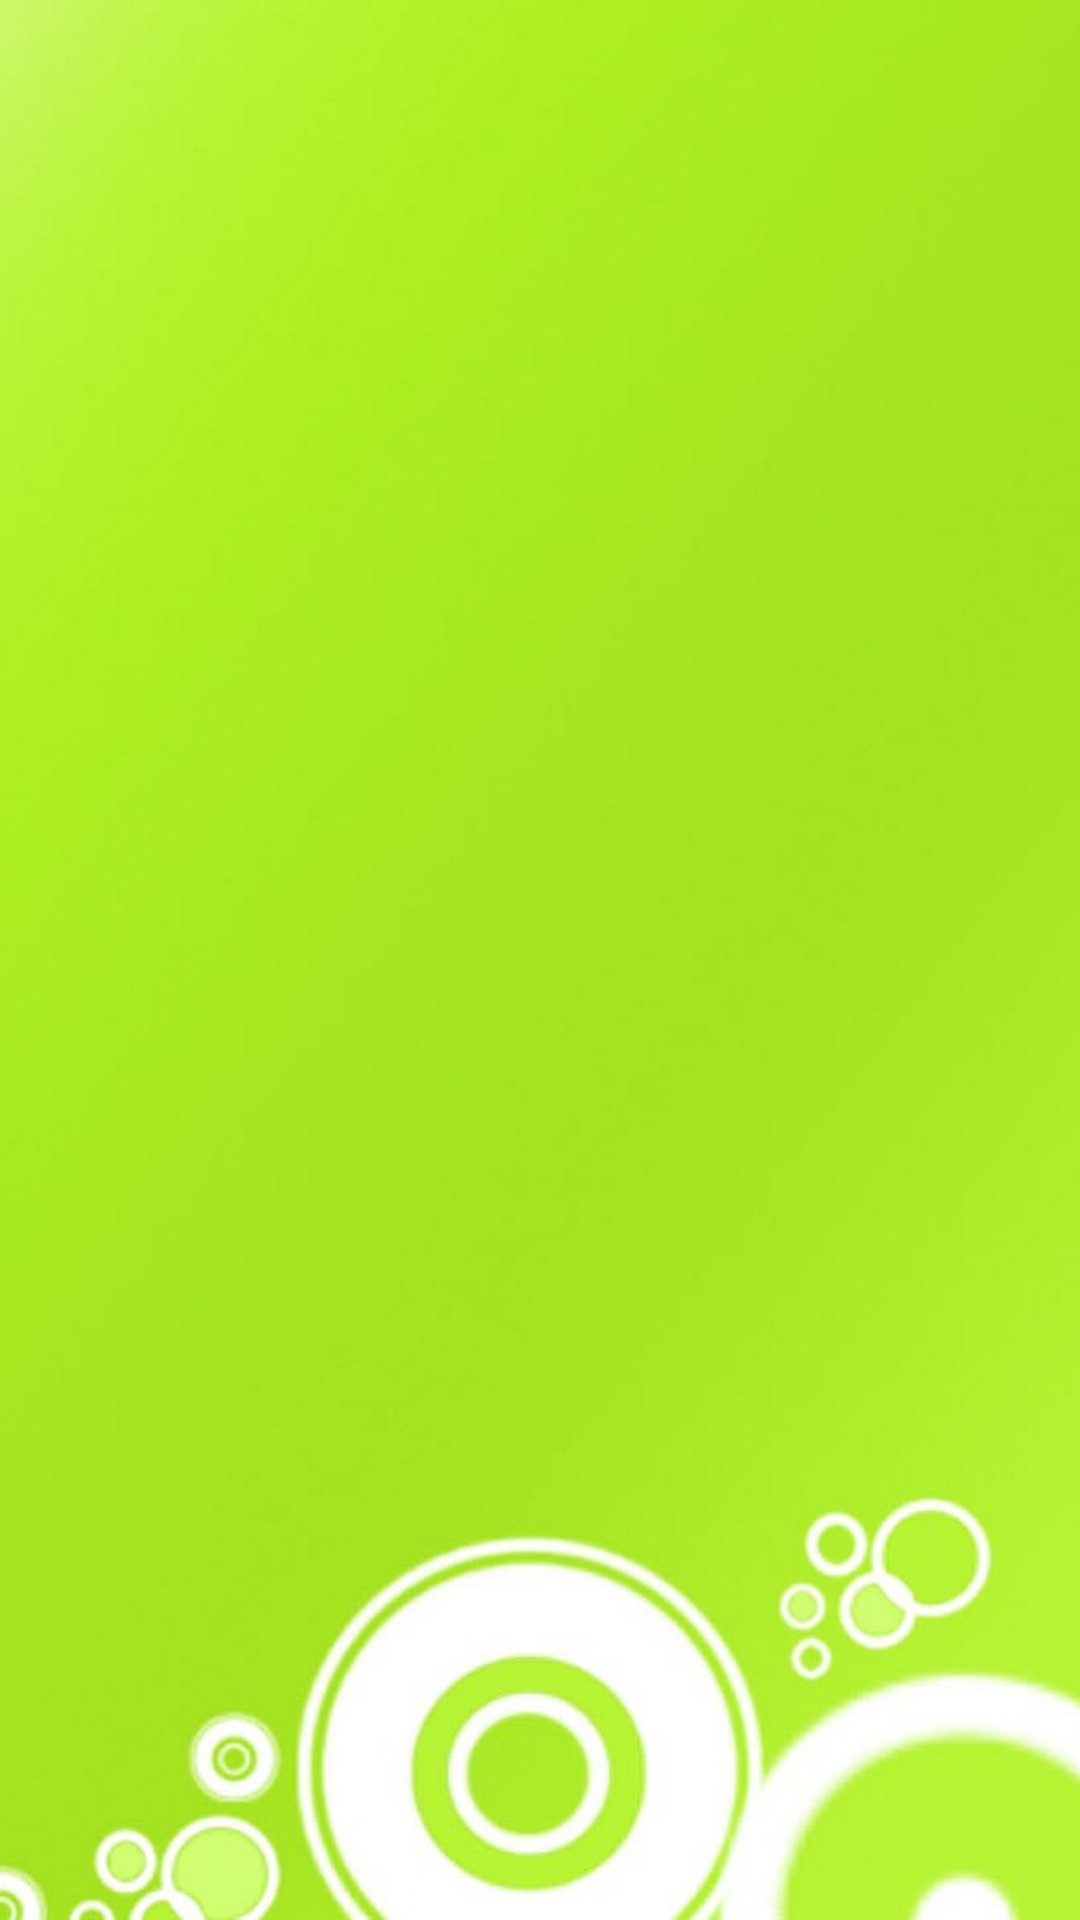 Wallpaper Lime Green iPhone with image resolution 1080x1920 pixel. You can make this wallpaper for your iPhone 5, 6, 7, 8, X backgrounds, Mobile Screensaver, or iPad Lock Screen